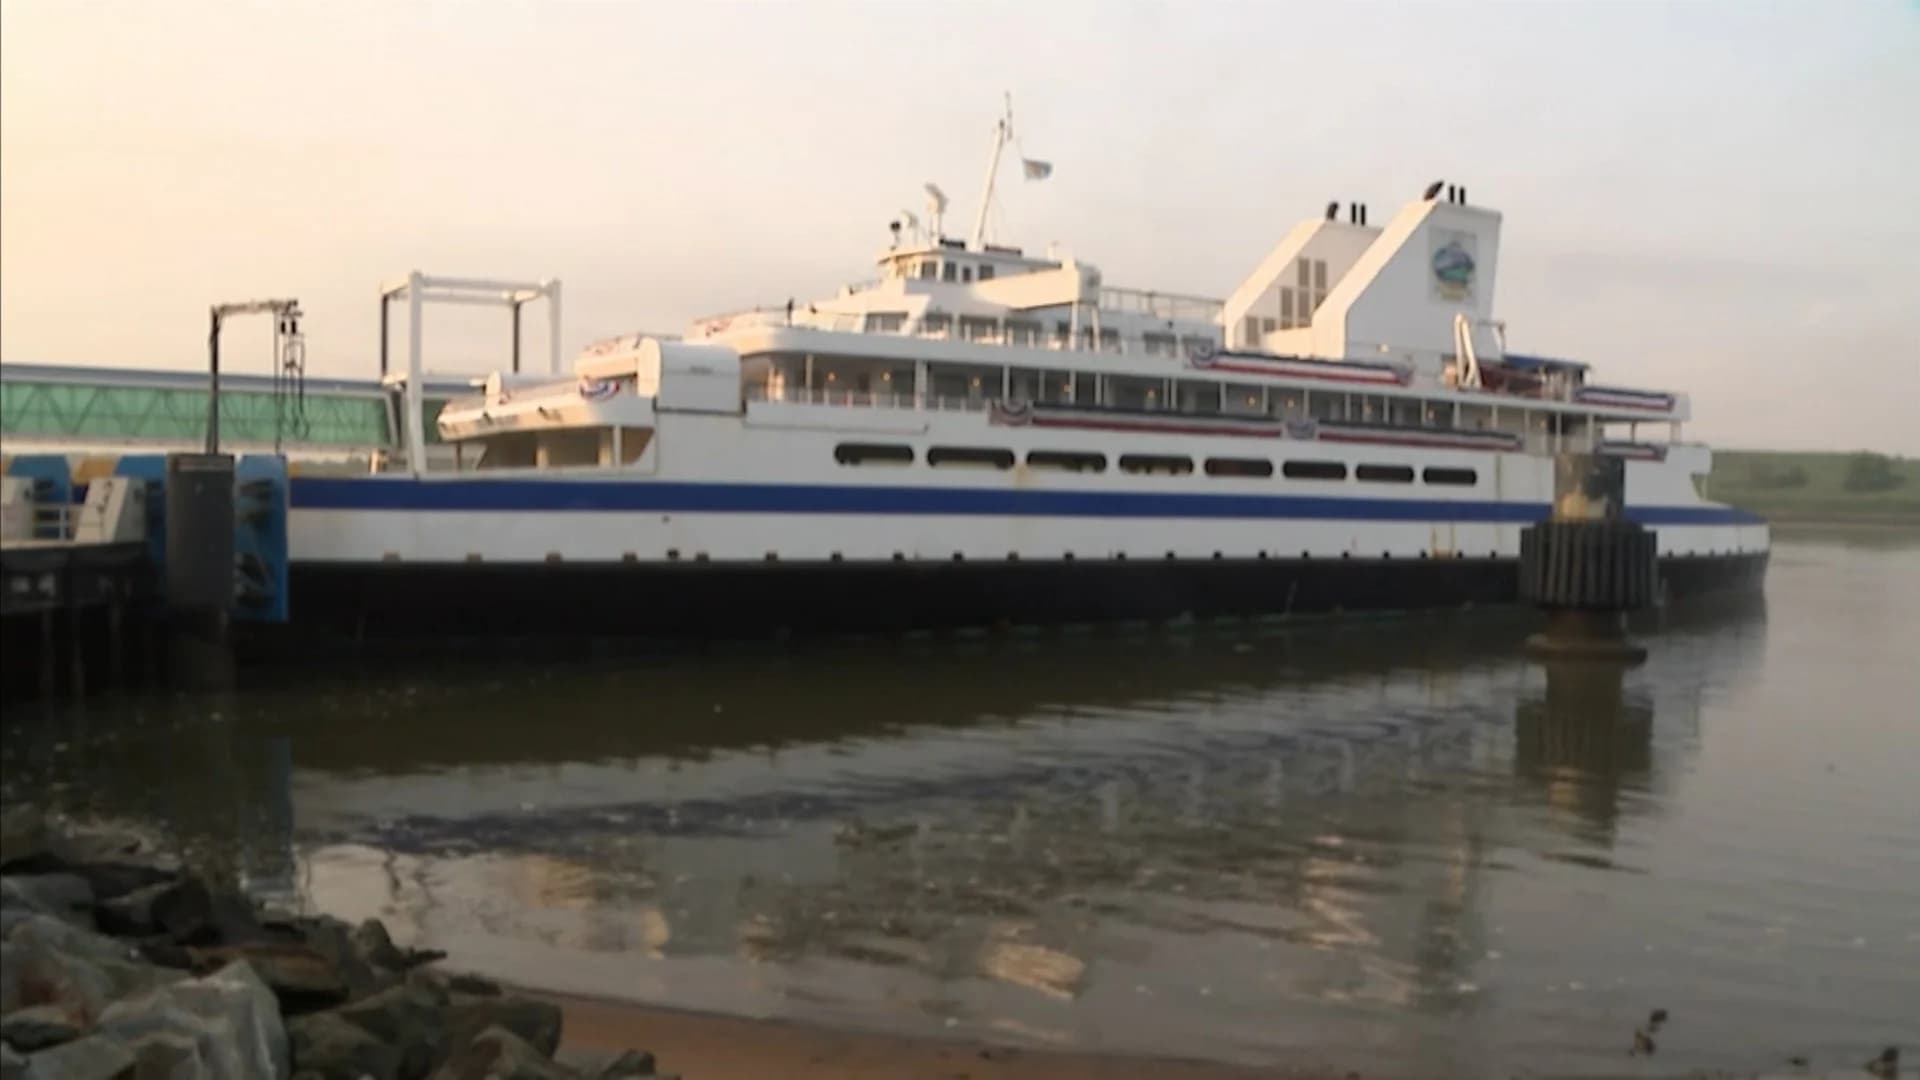 Mechanical issues cause schedule changes on Cape May-Lewes Ferry